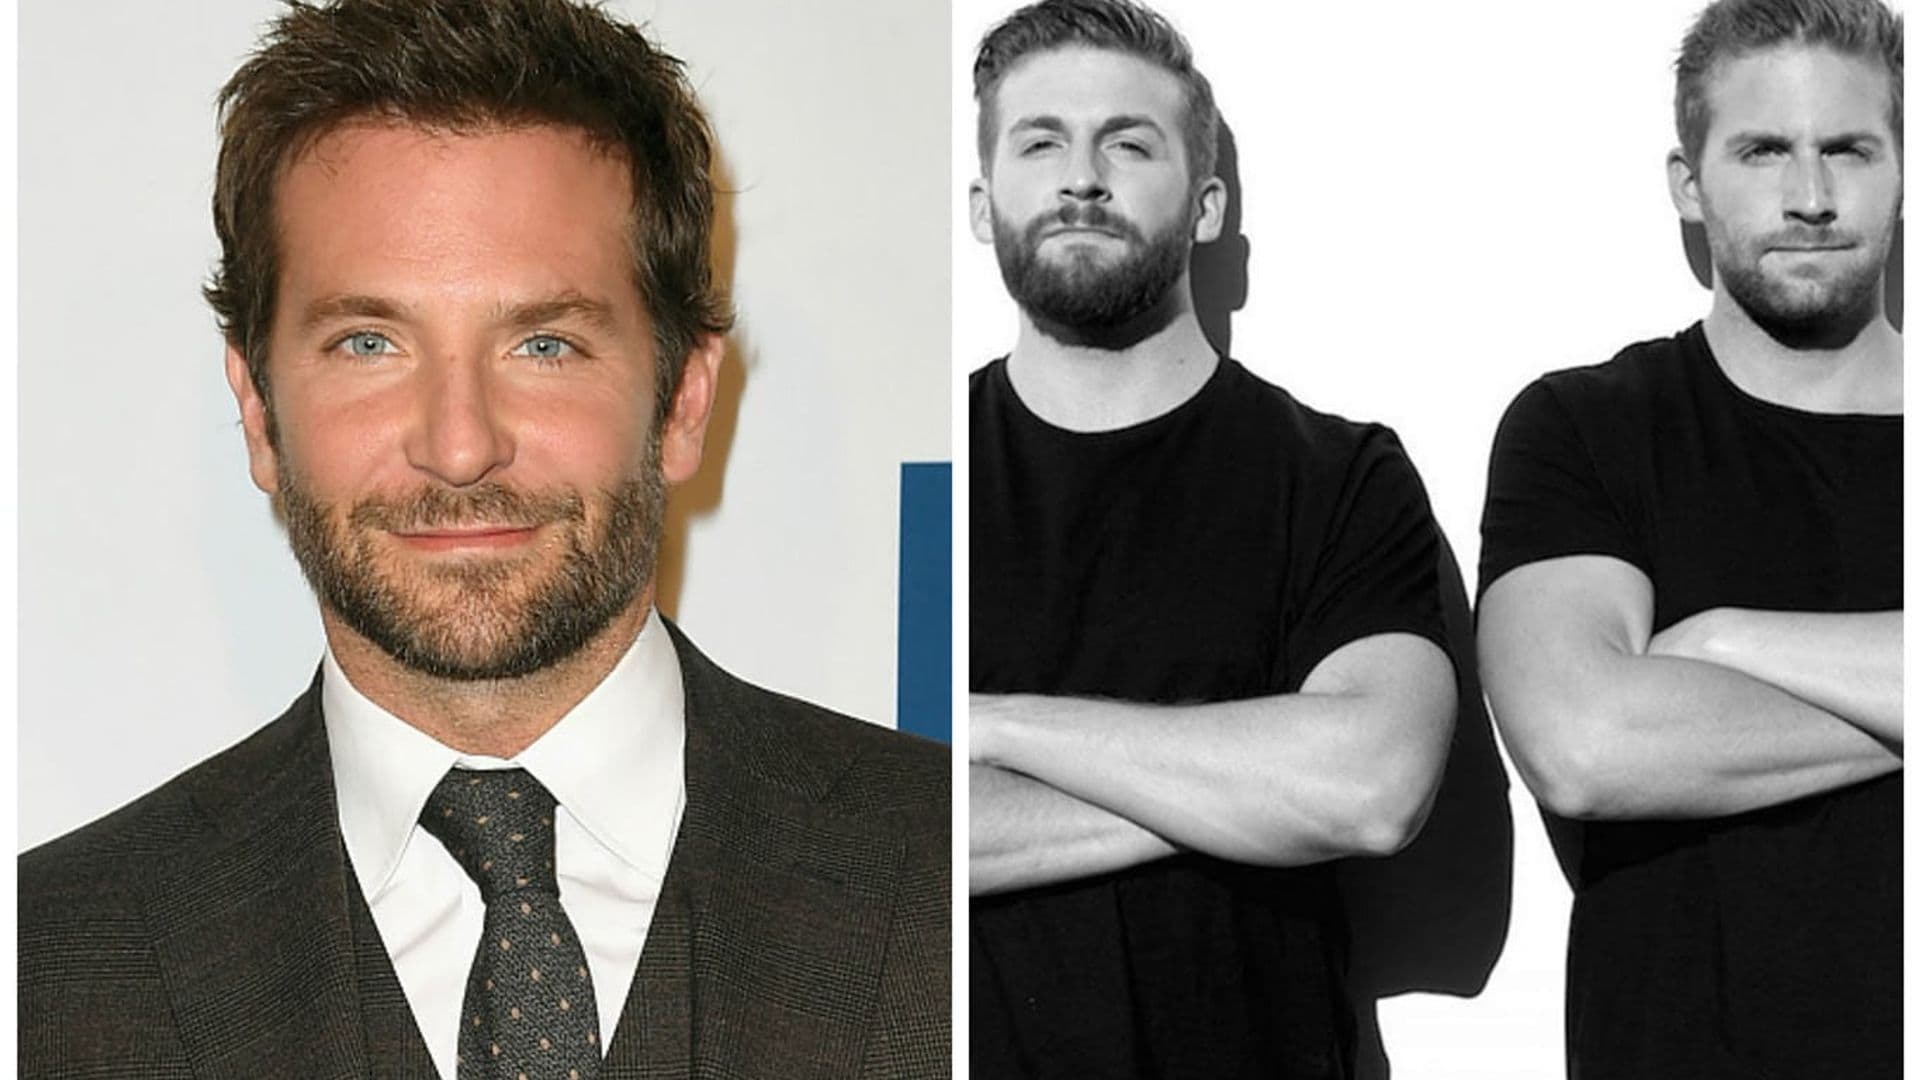 Bradley Cooper's look-alike speaks out about his hilarious 'daily struggle'